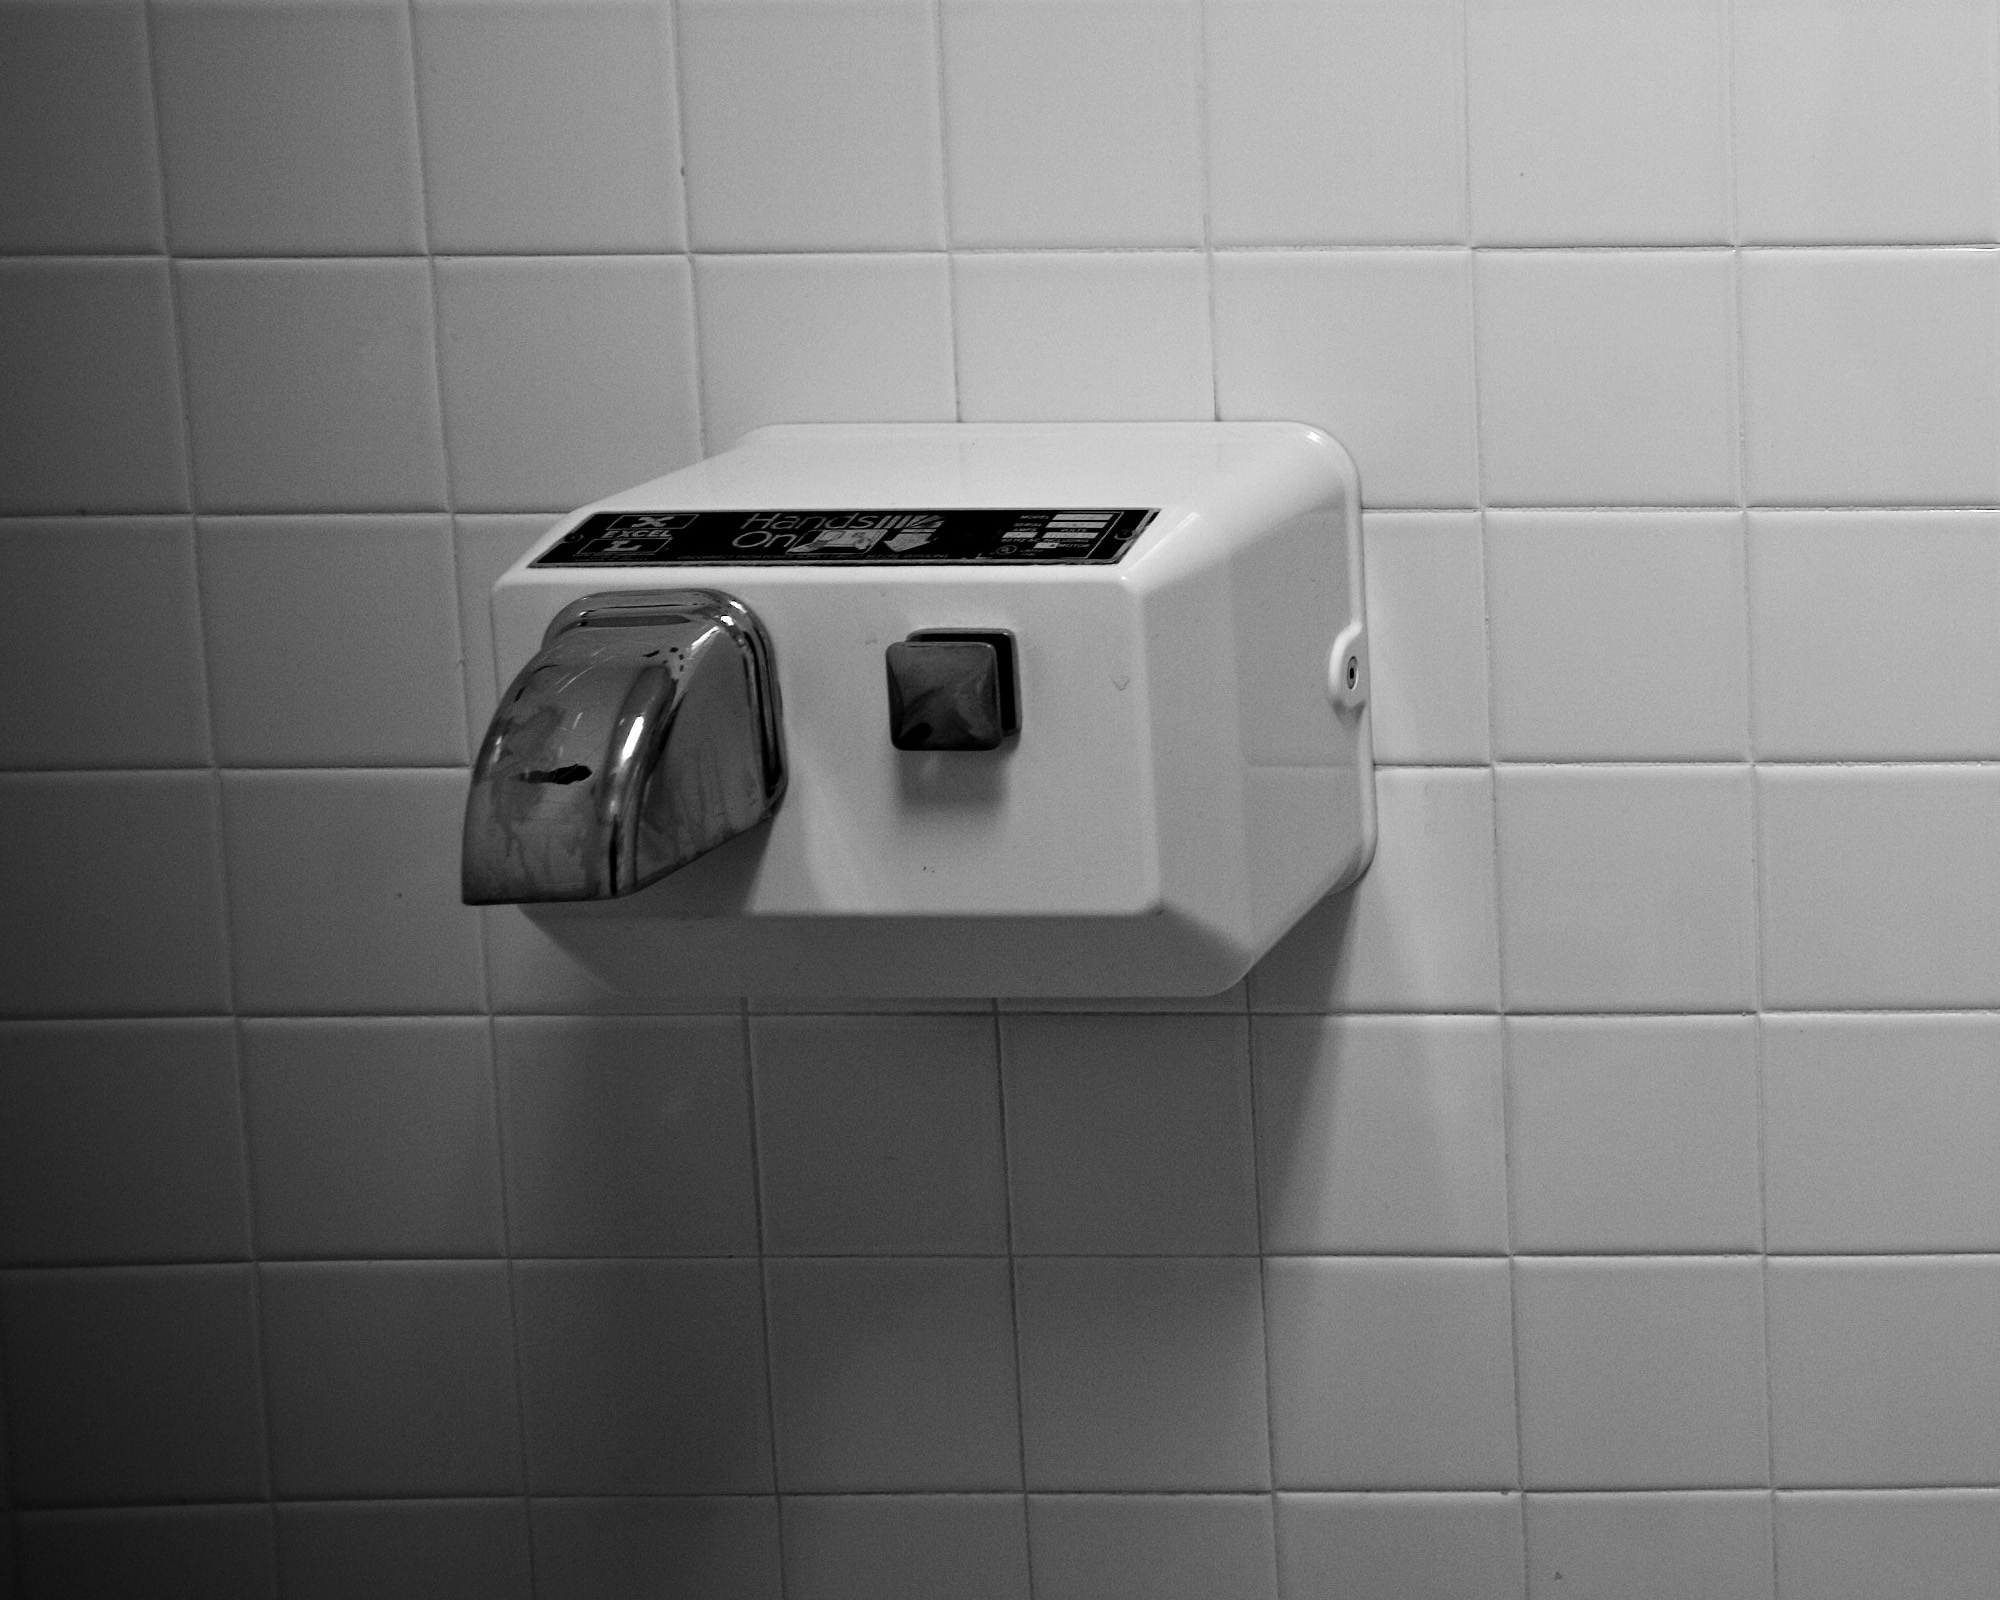 Bathroom Hand Dryers Spray Feces Particles On Your Hands